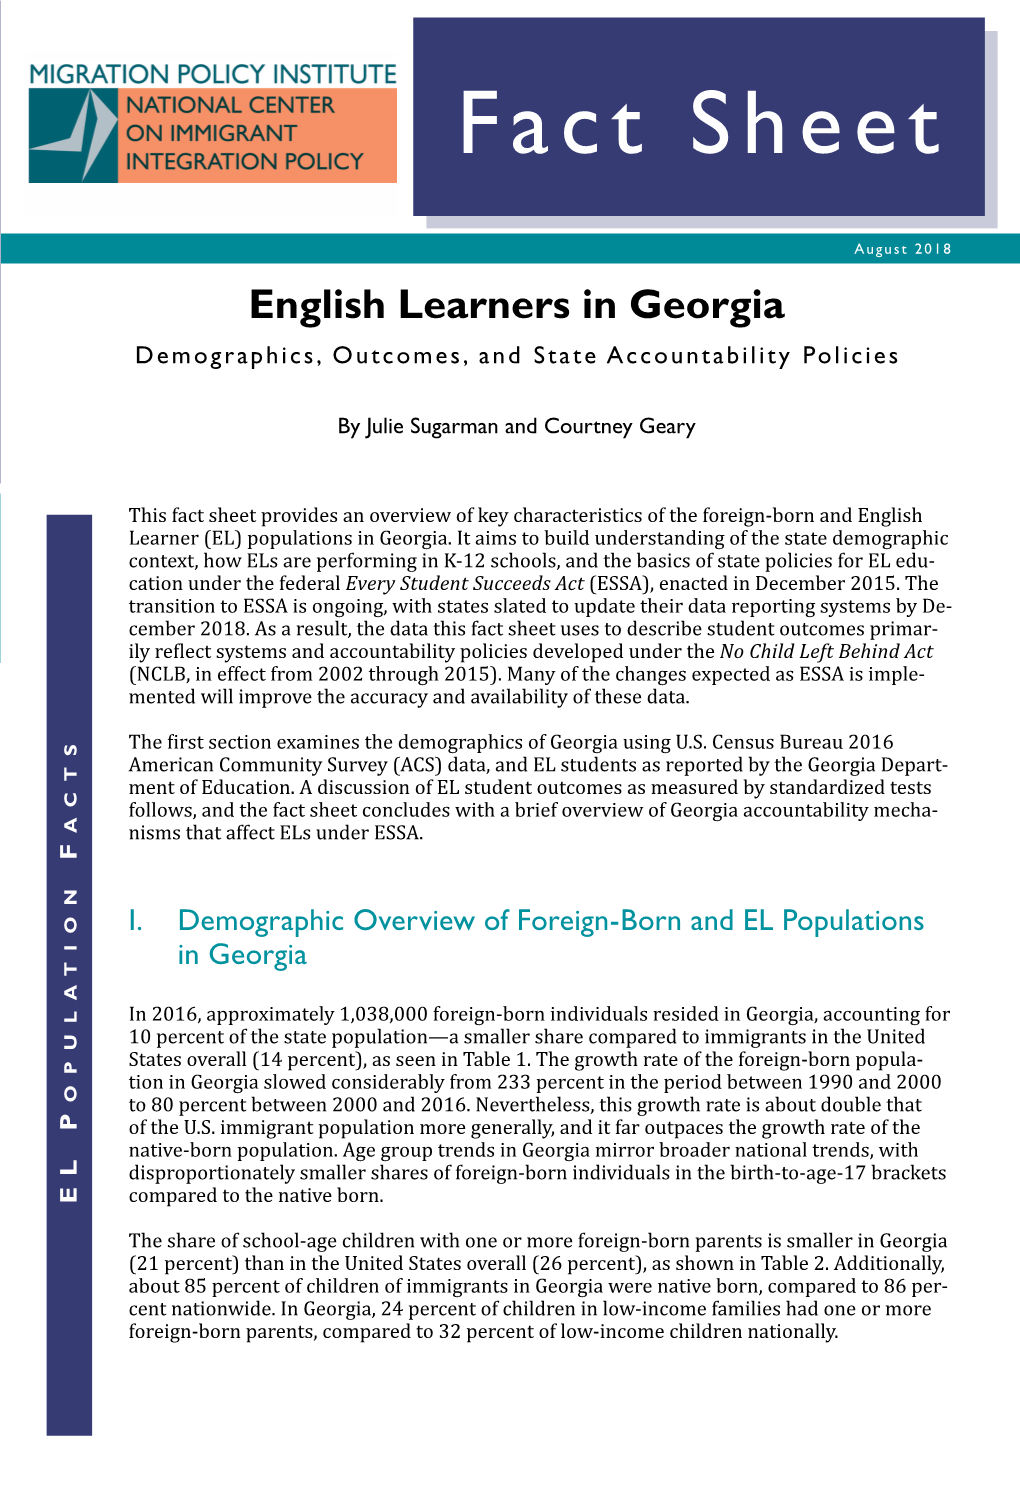 English Learners in Georgia Demographics, Outcomes, and State Accountability Policies